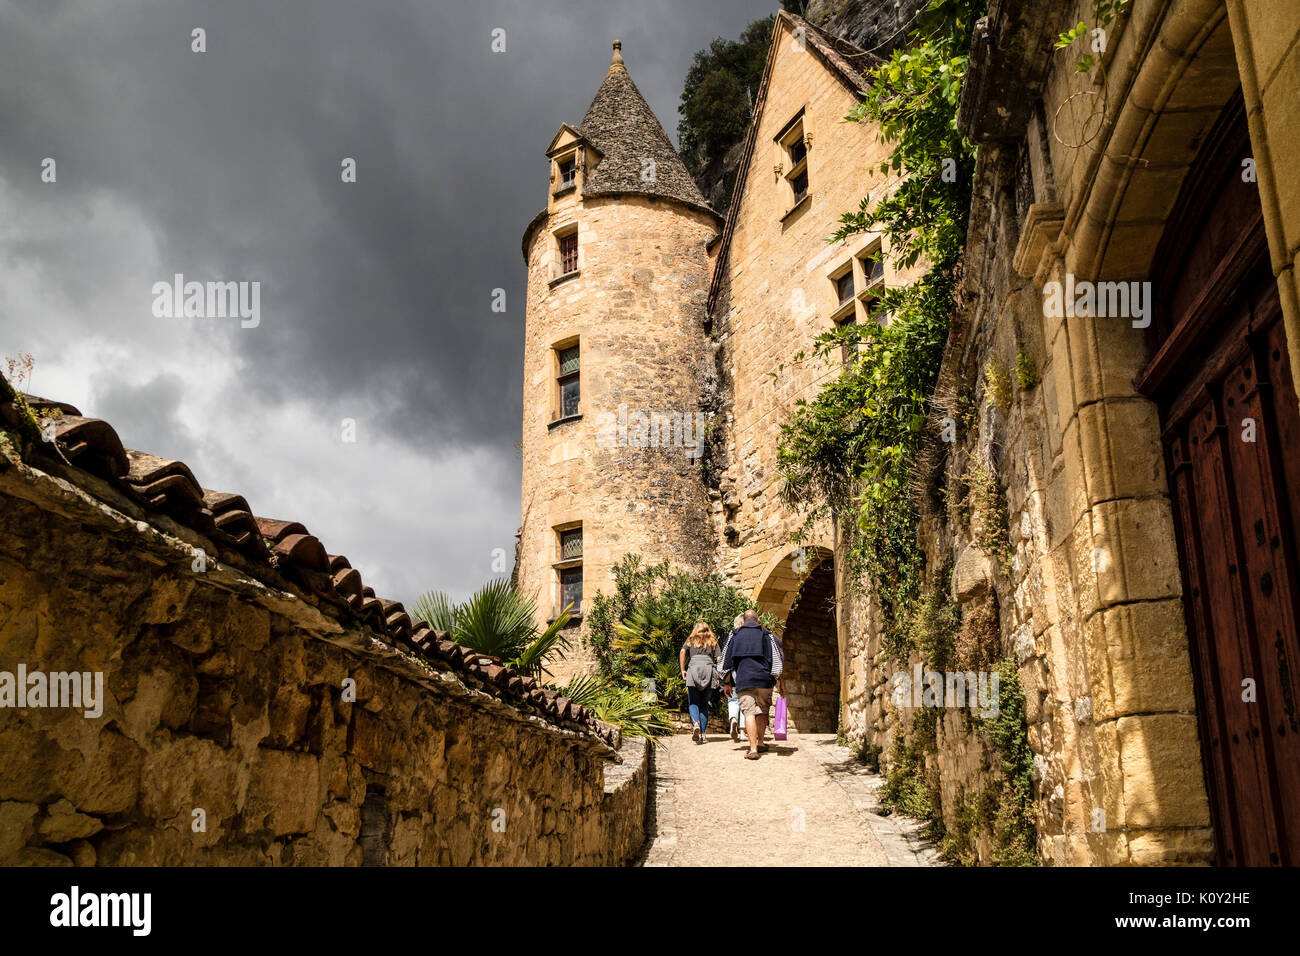 The 15th Century Renaissance Style Manoir de Tarde in the Village of La Roque-Gageac, Set Against a Dramatic Stormy Sky, Dordogne, France, Europe Stock Photo